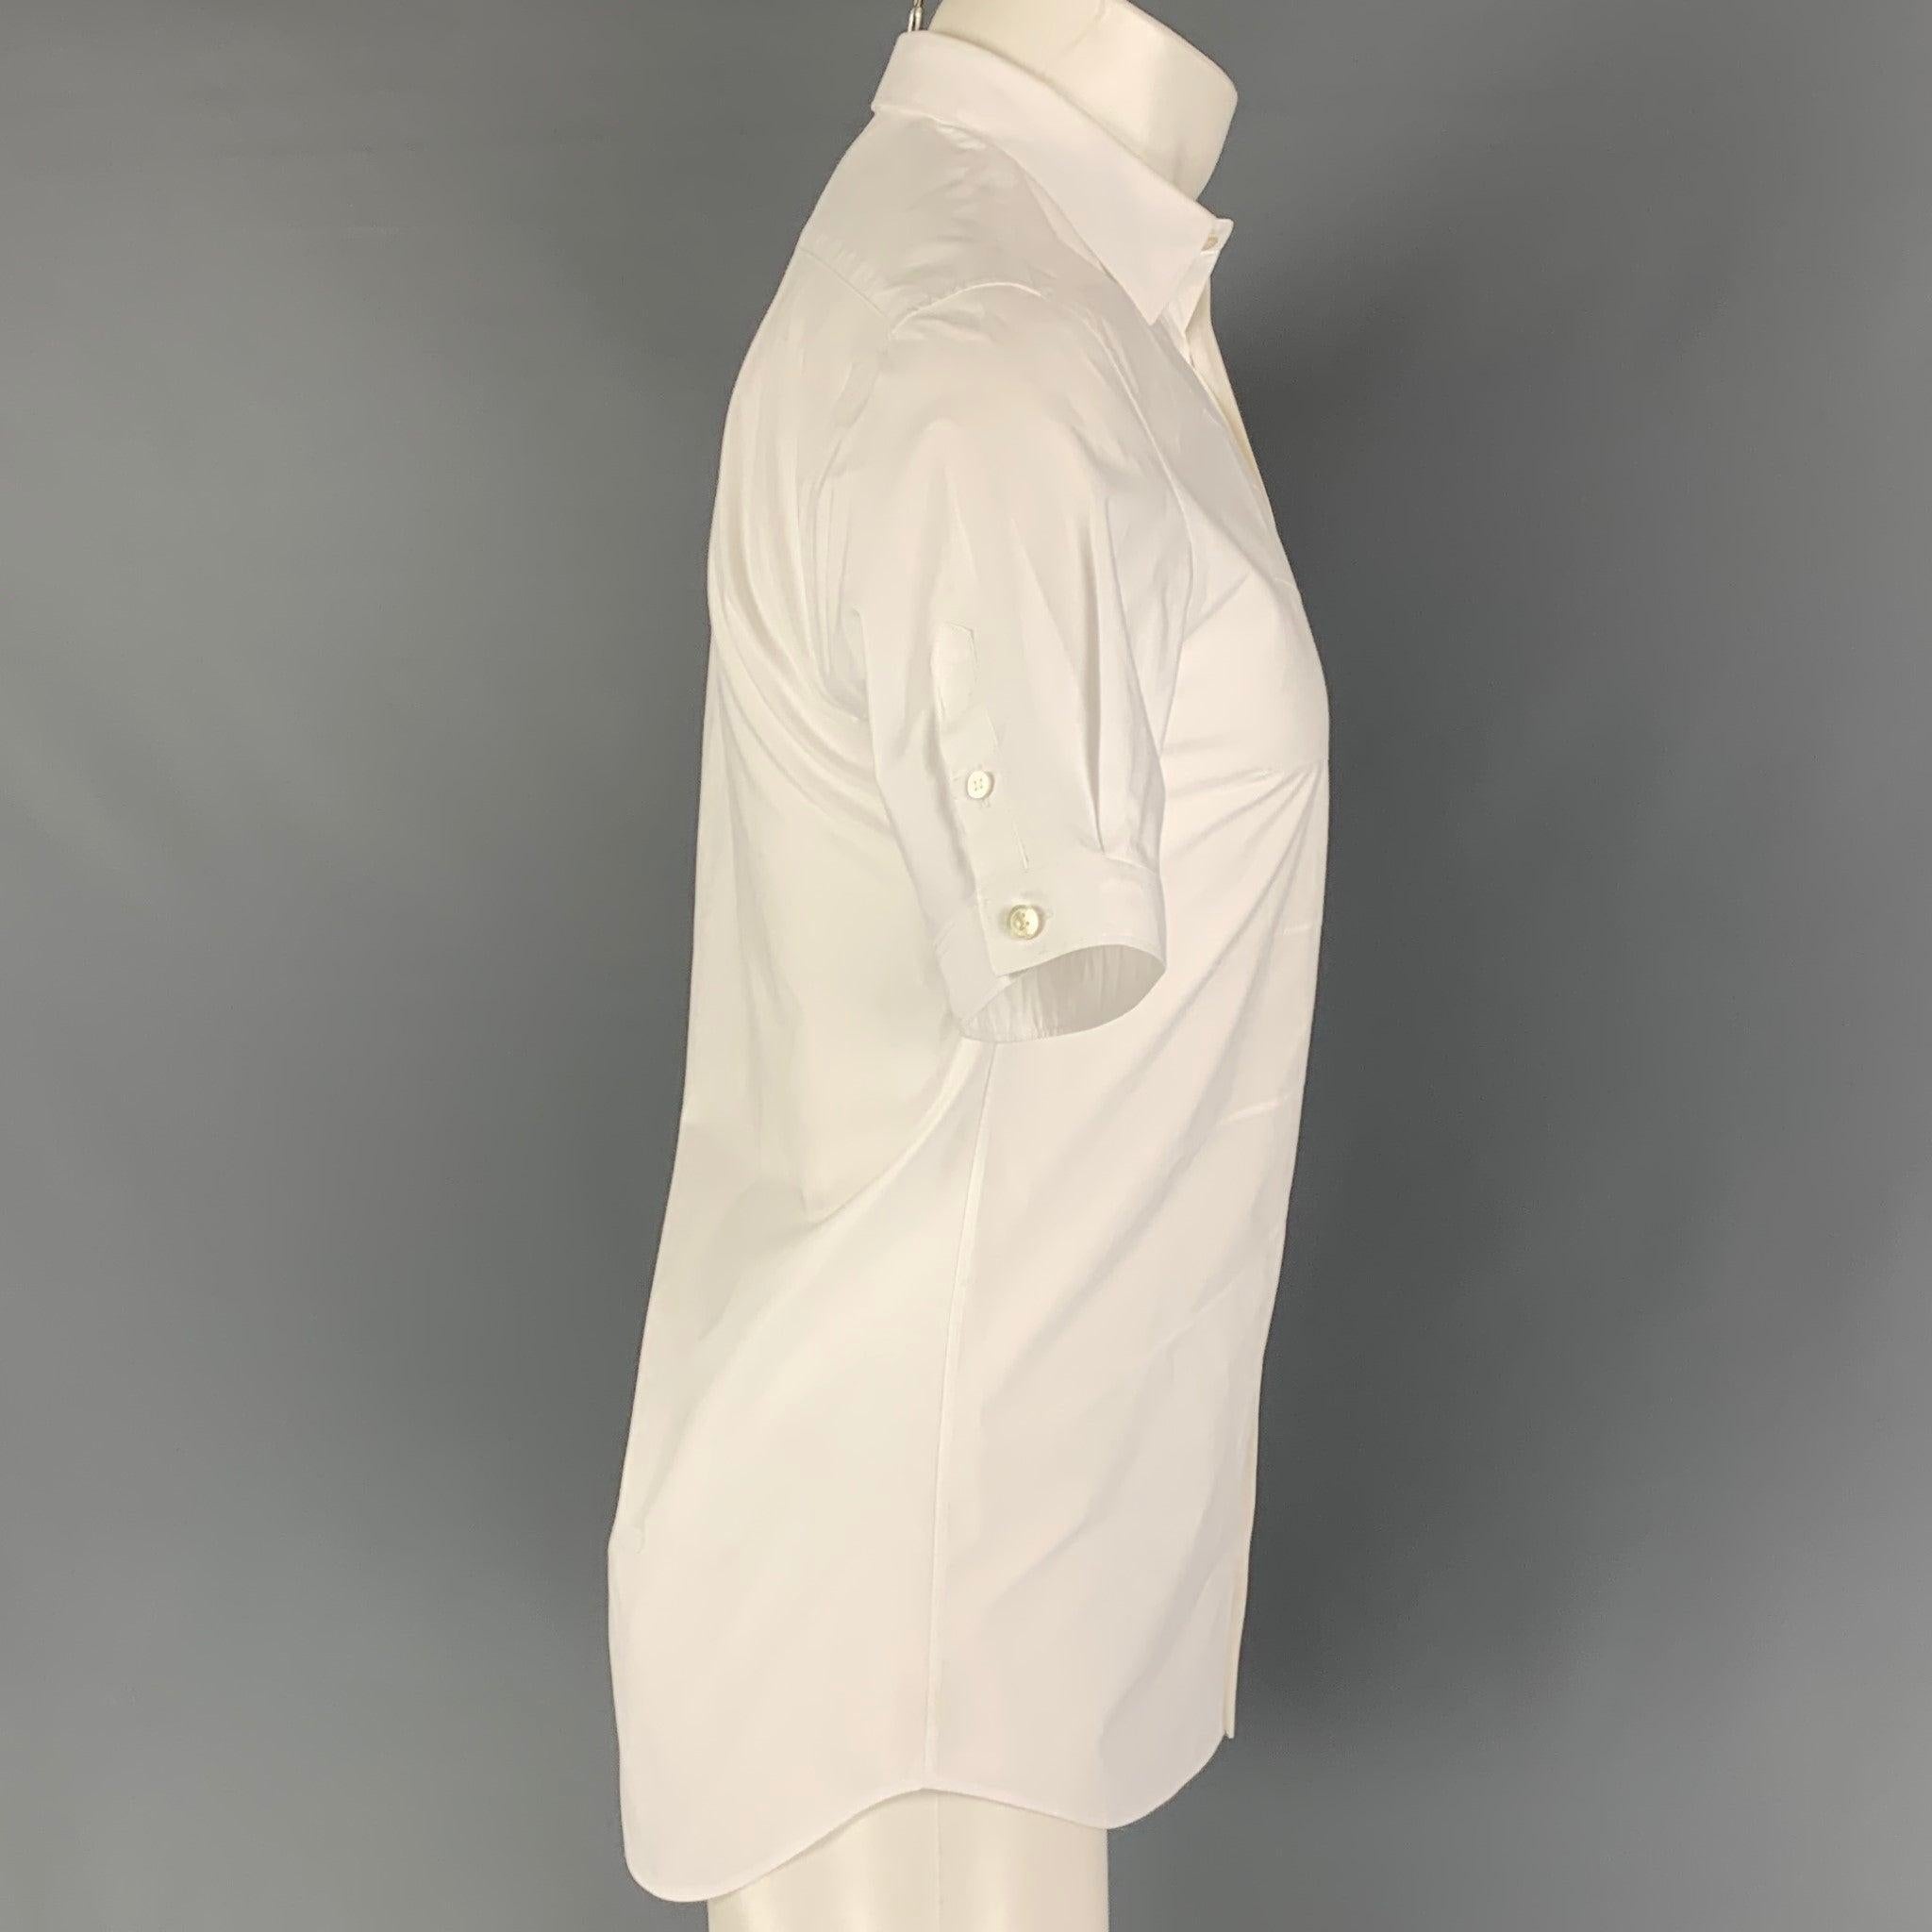 ALEXANDER McQUEEN short sleeve shirt comes in a white cotton featuring top stitching designs, buttoned sleeves, and a button up closure. Made in Romania.Very Good
Pre-Owned Condition. 

Marked:   15 

Measurements: 
 
Shoulder: 16 inches  Chest:
36